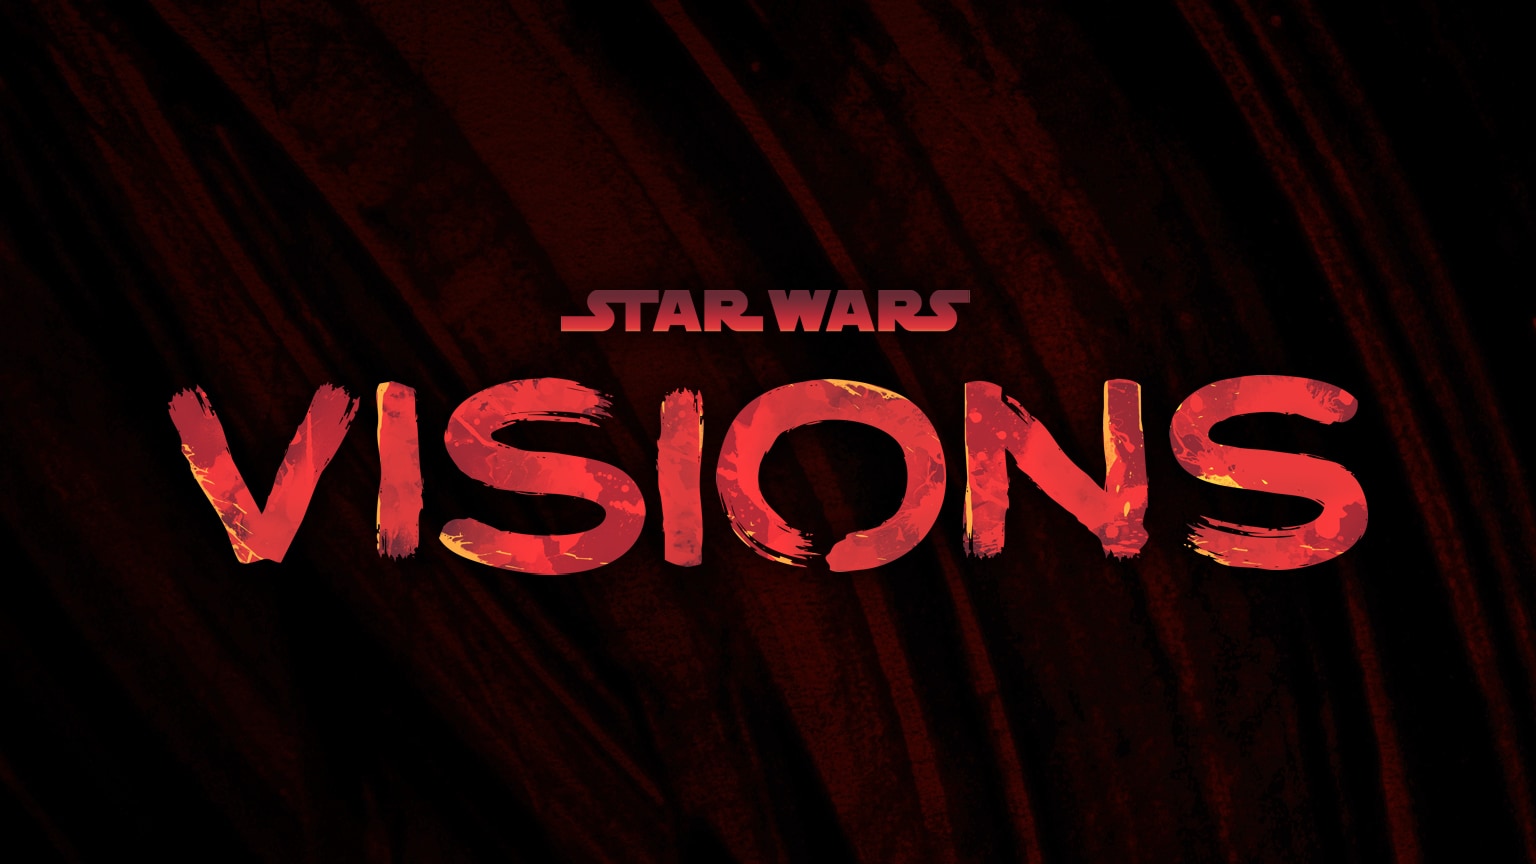 Star Wars: Visions Volume 2 Trailer, Poster And Release Date